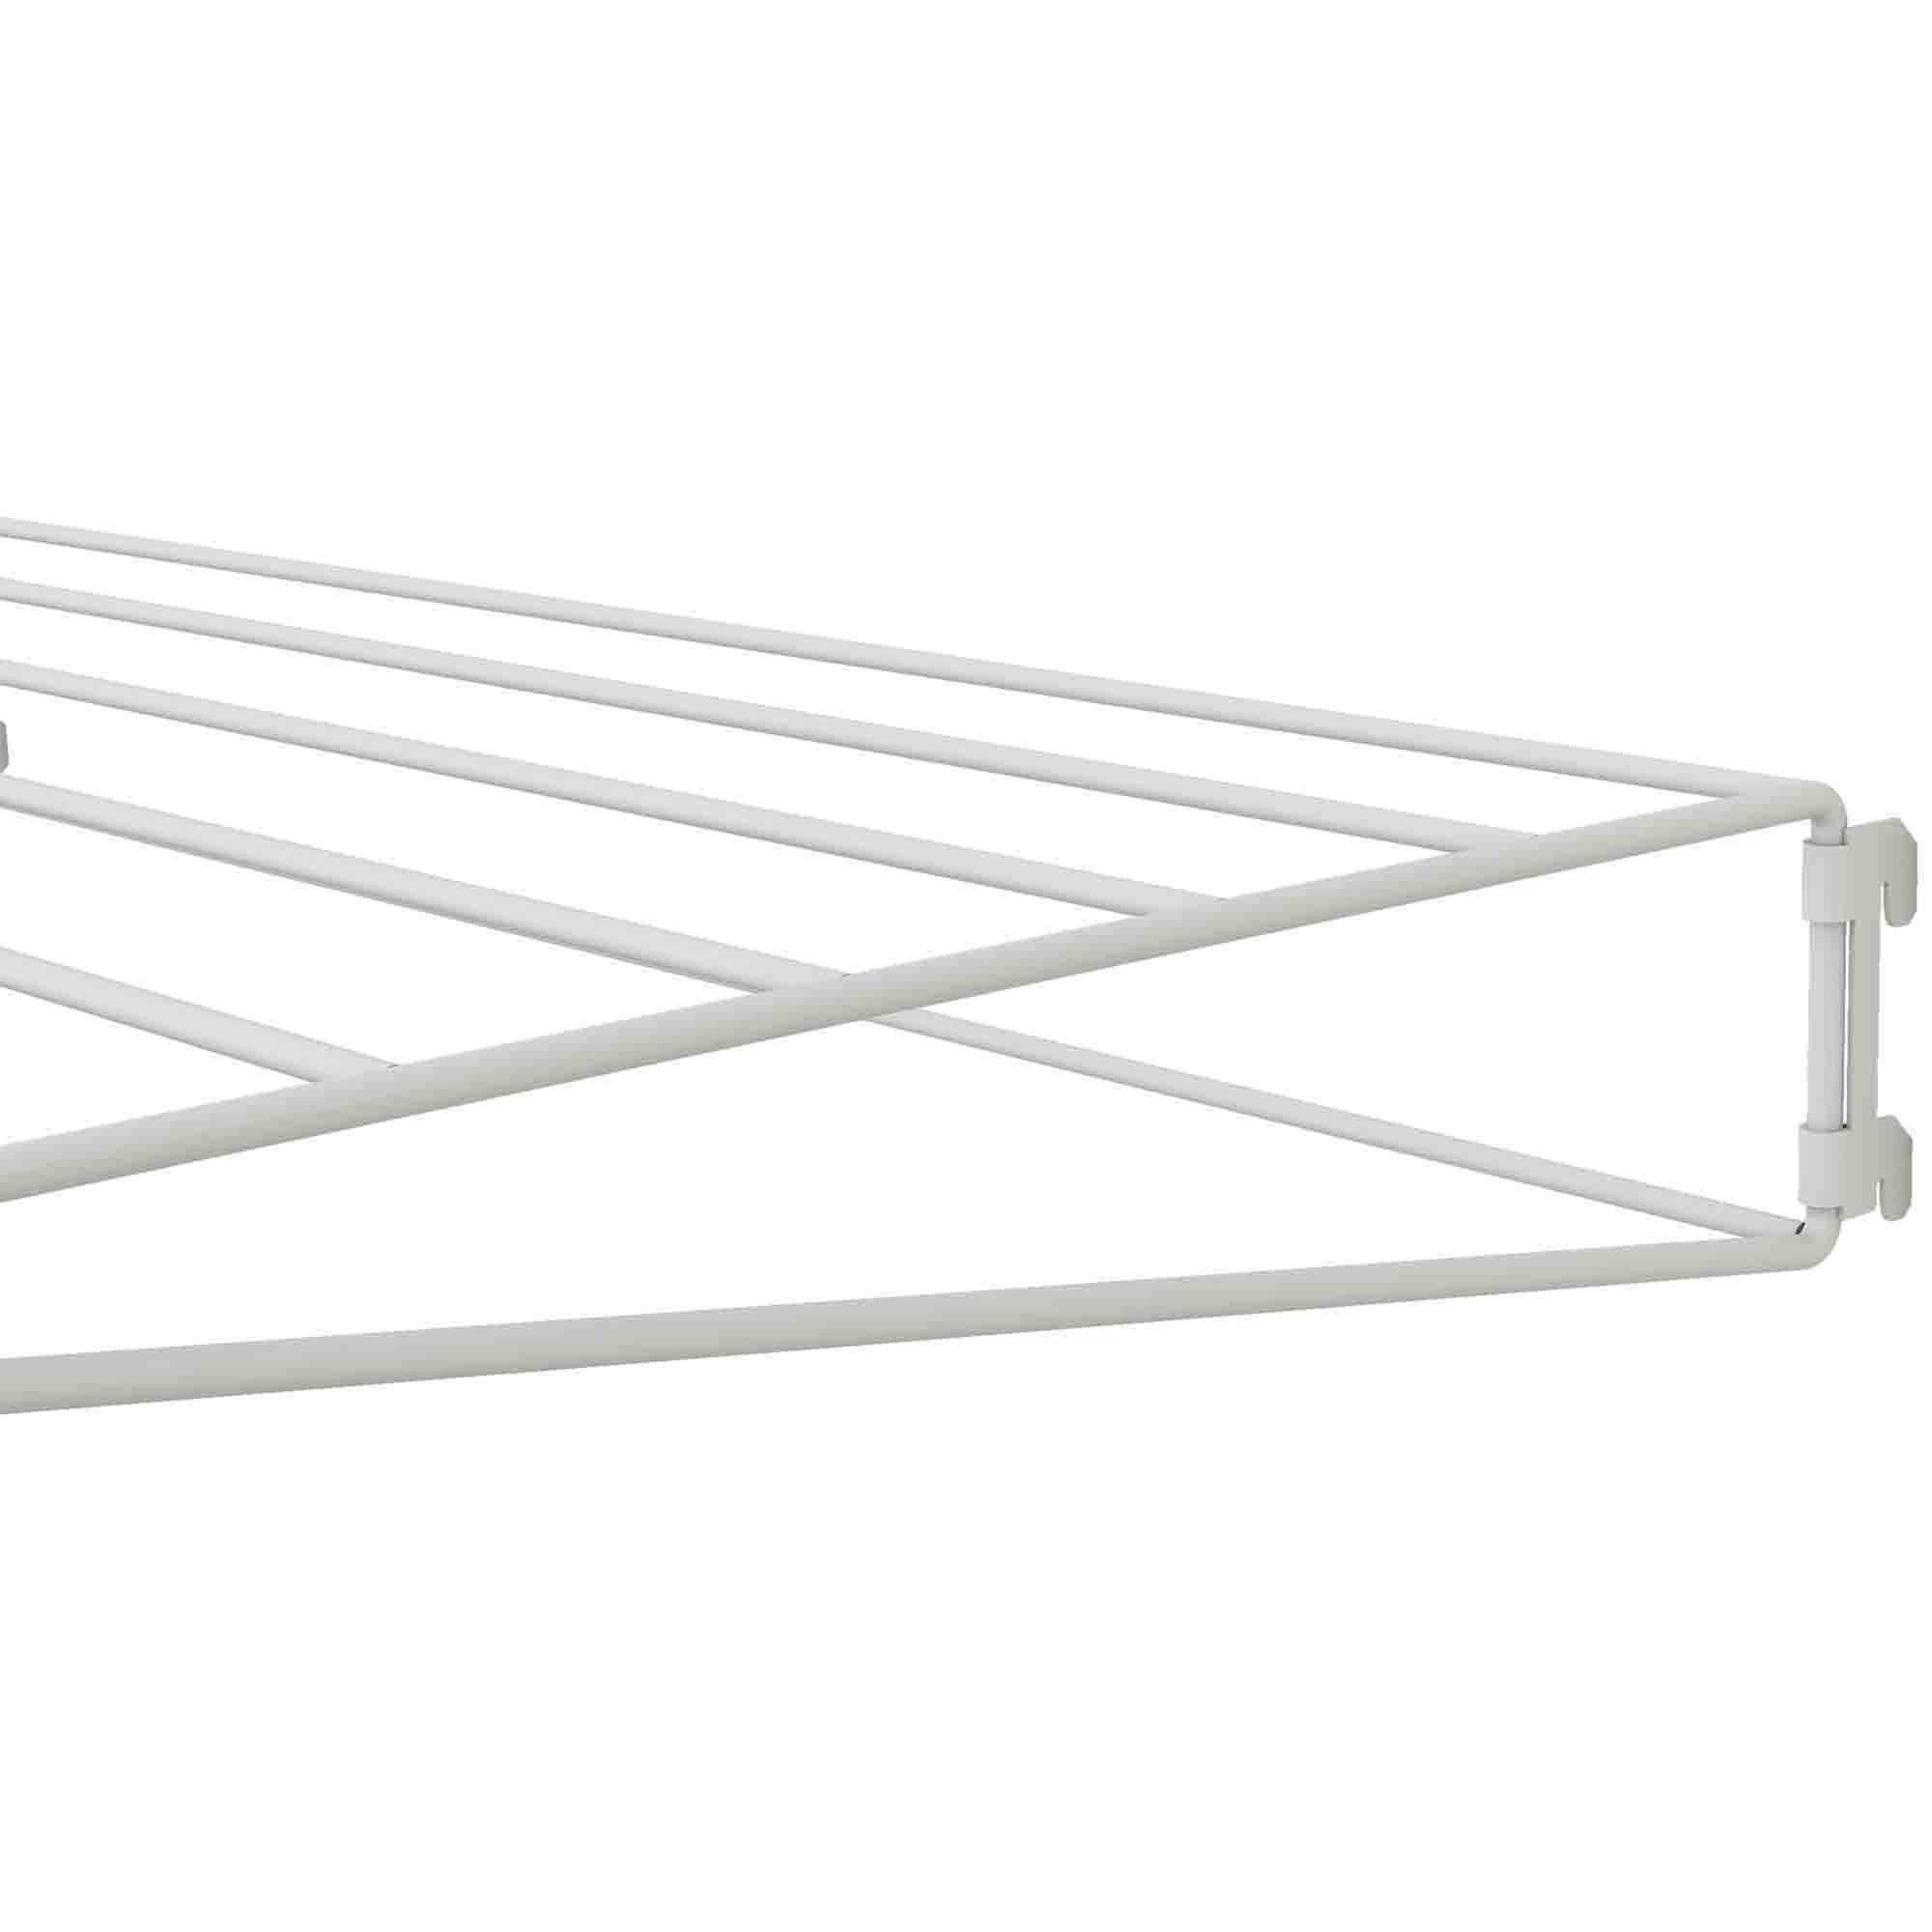 Twinslot White Wall-mounted Laundry airer